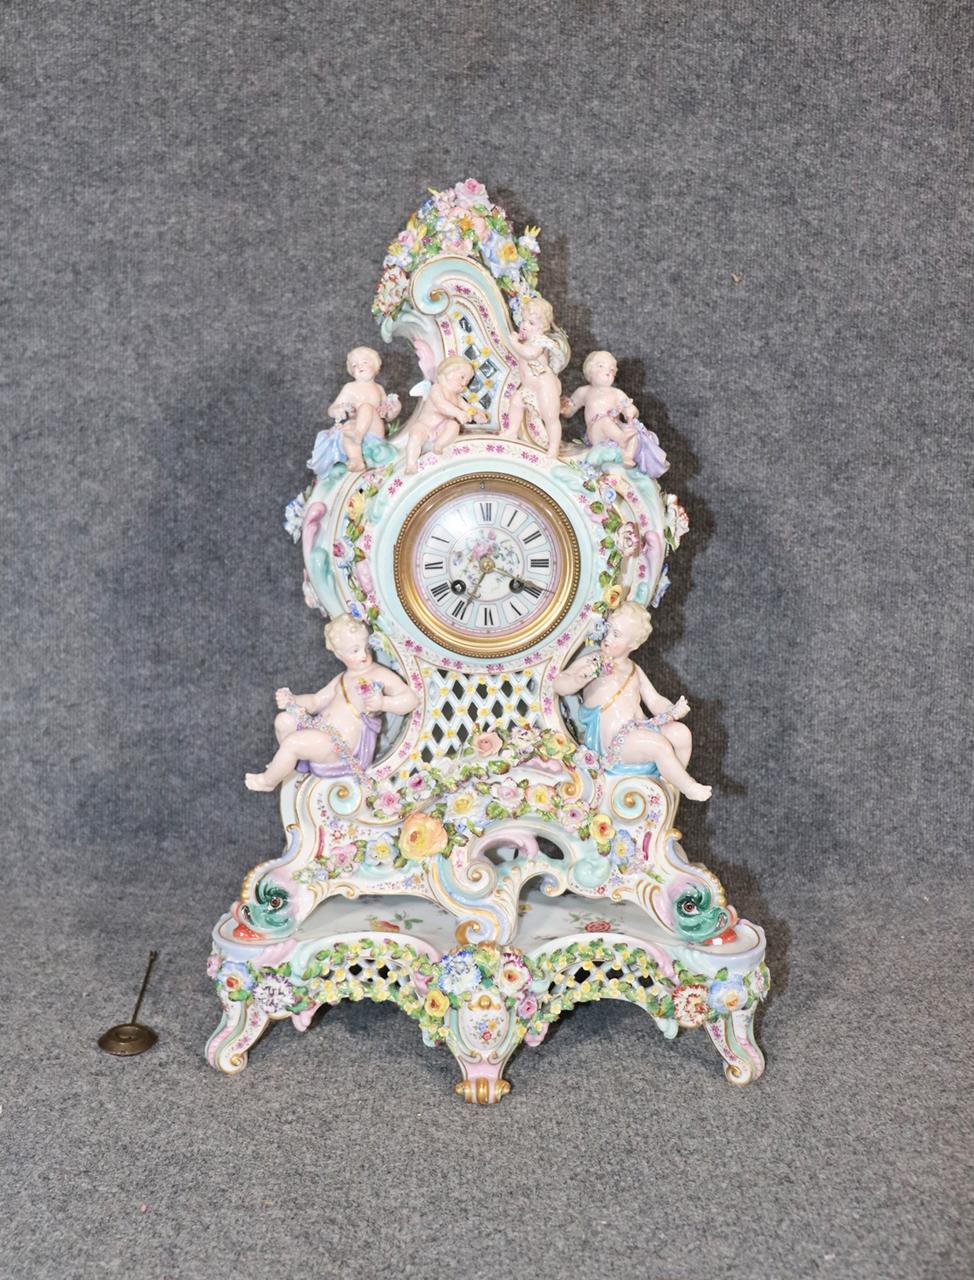 Meissen porcelain. Pain decorated. Figural. Removes from base. Floral detail. Measures: 23 1/2